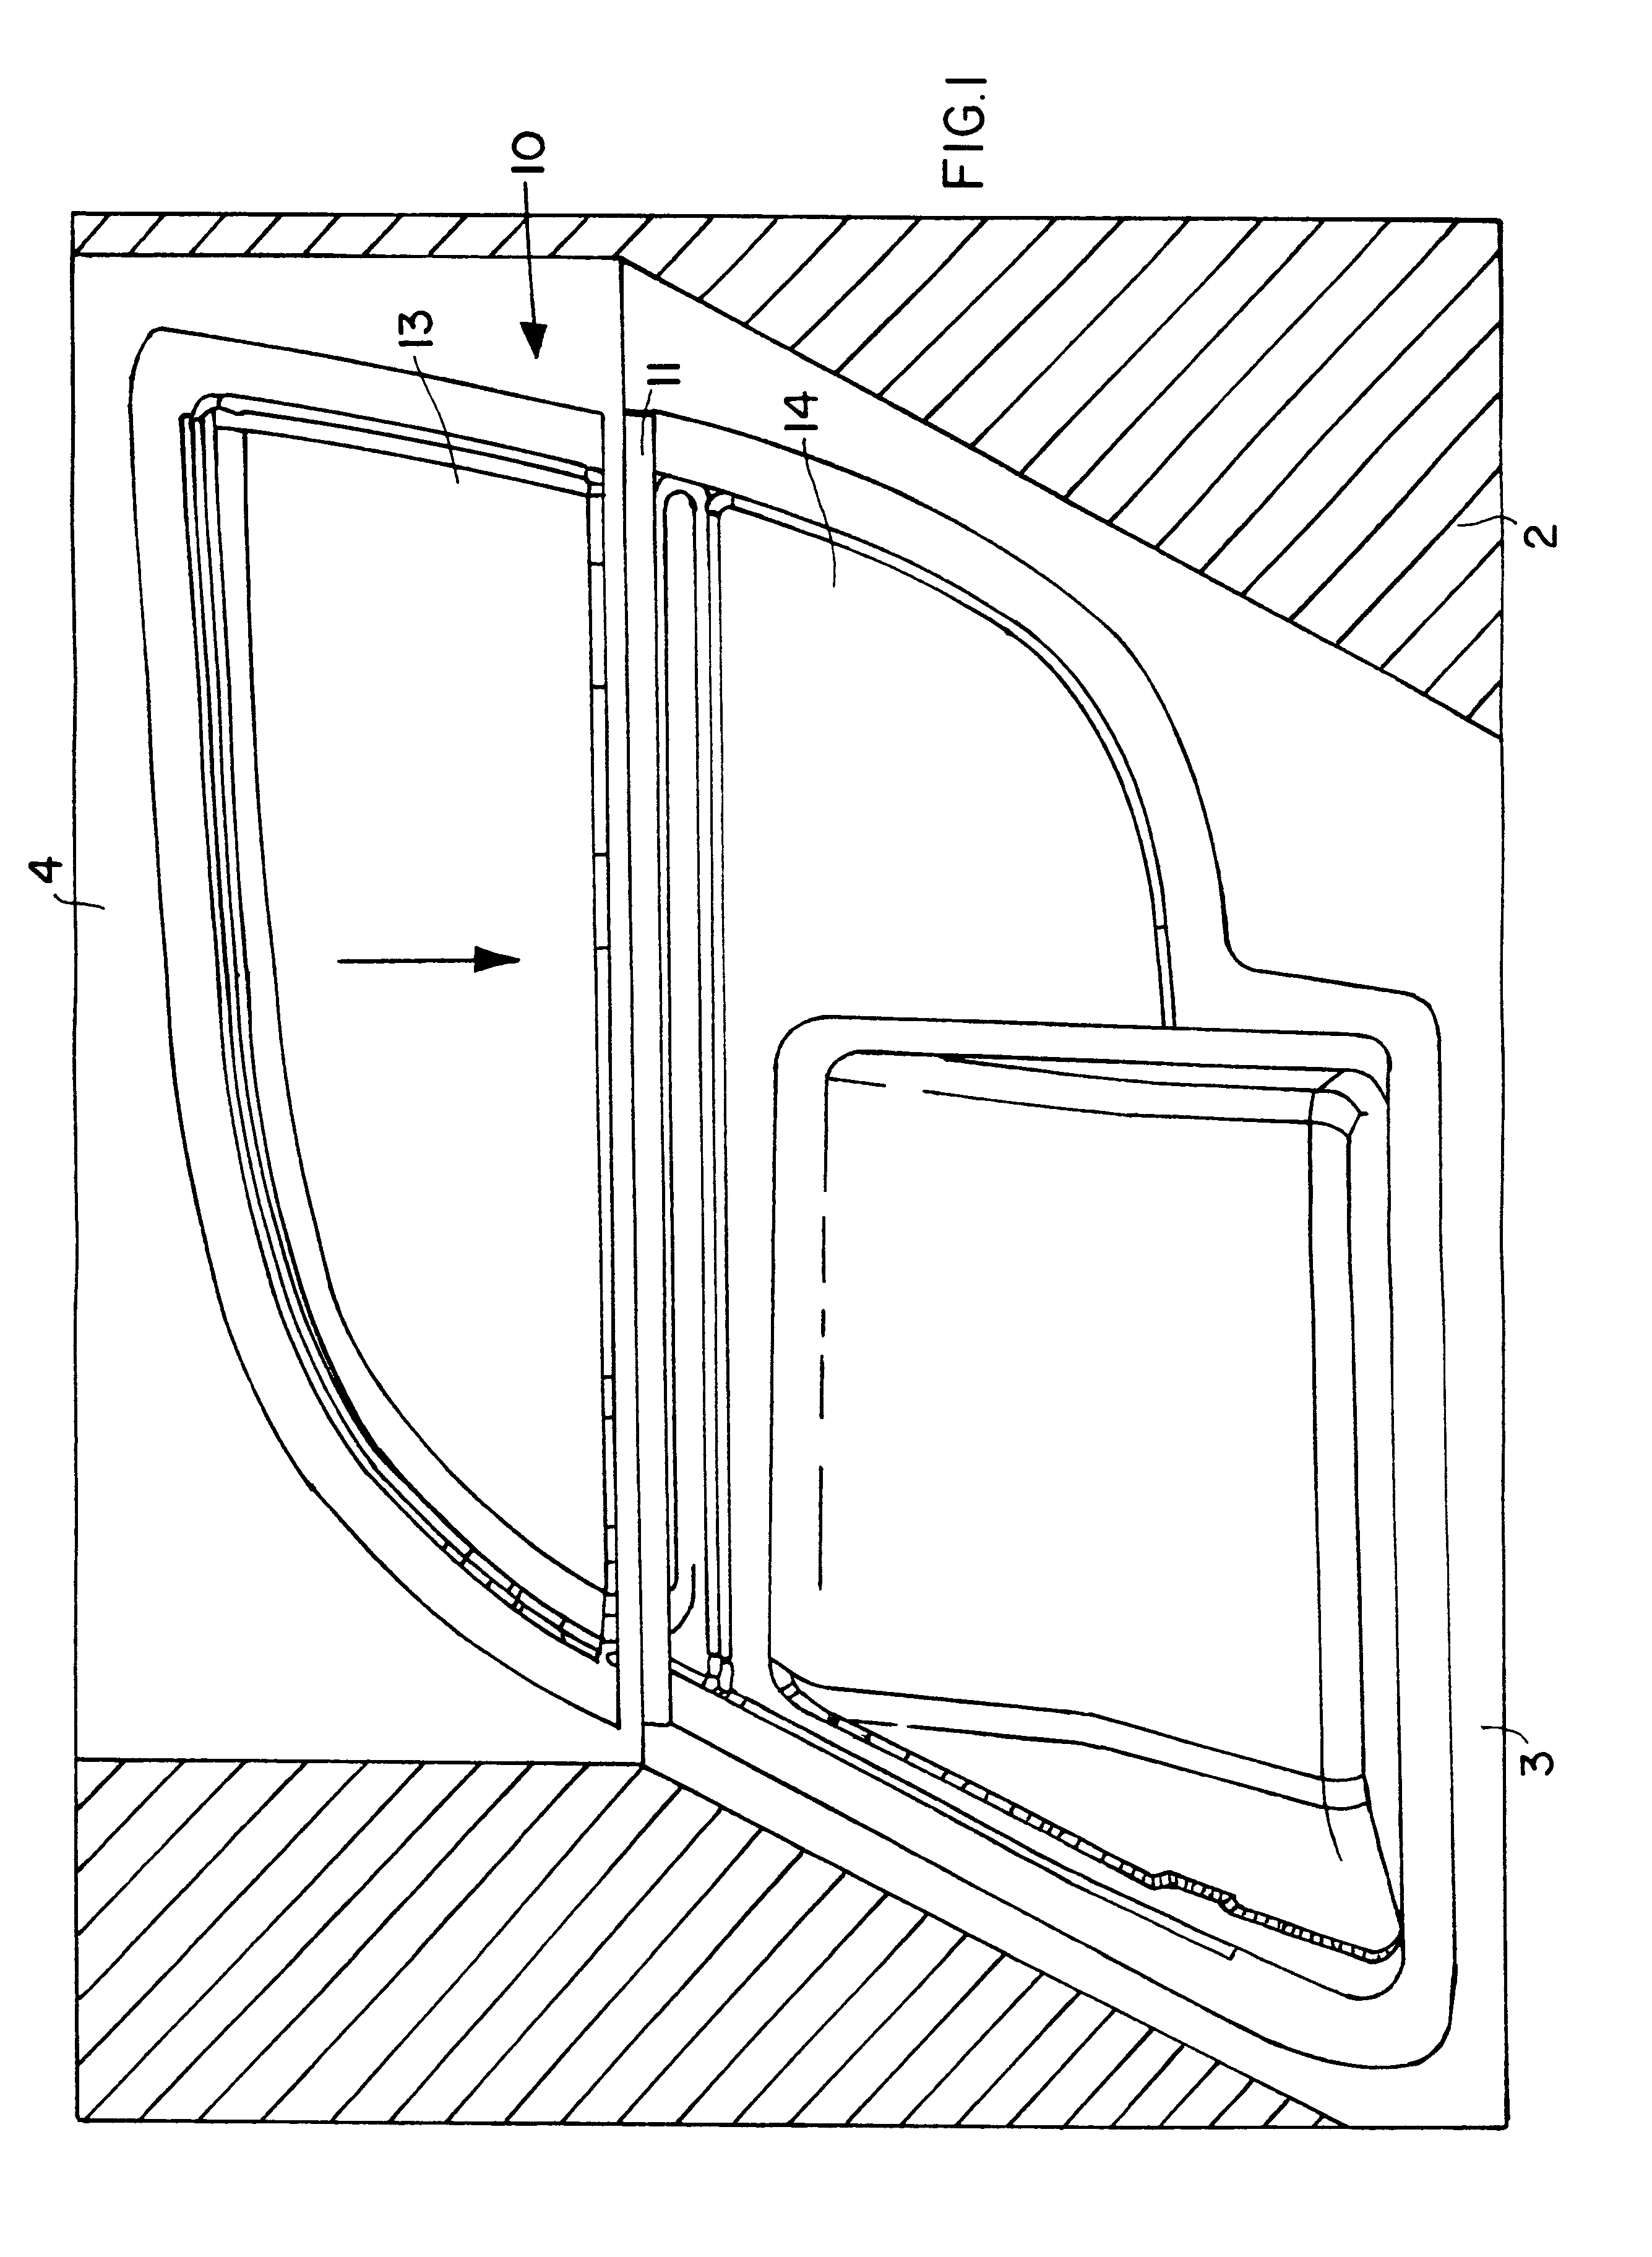 Vehicle trim component having two-part cover material, and method and apparatus for producing the same